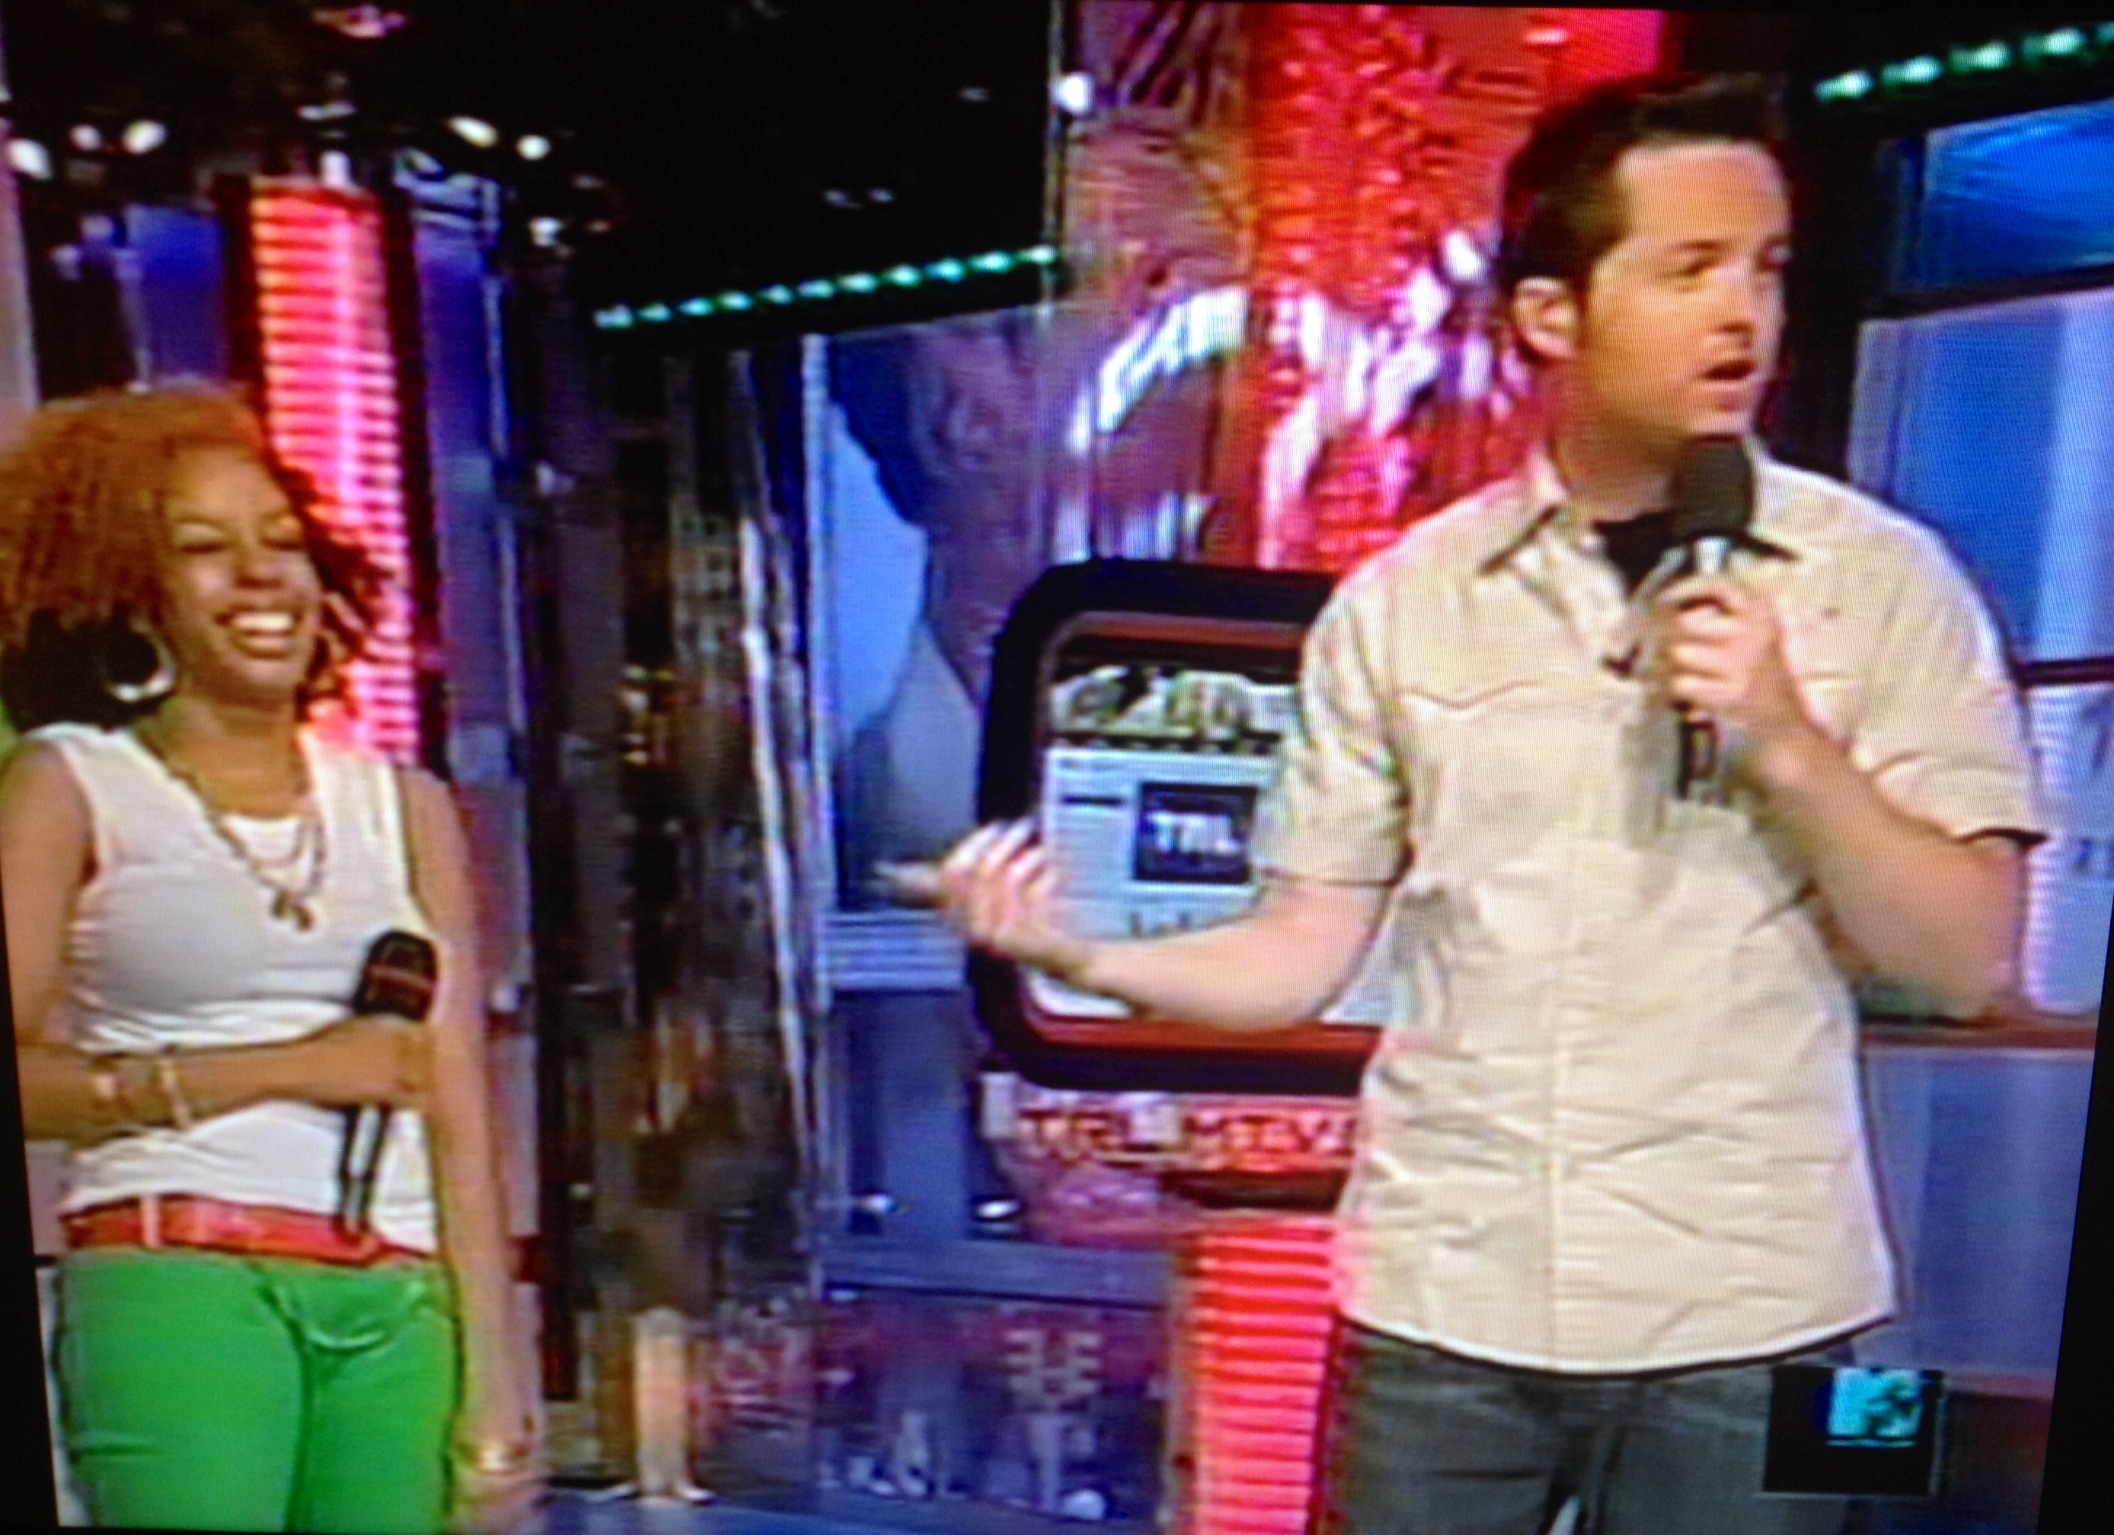 Live interview with Damien Fahey on MTV's TV show Total Request Live (TRL).